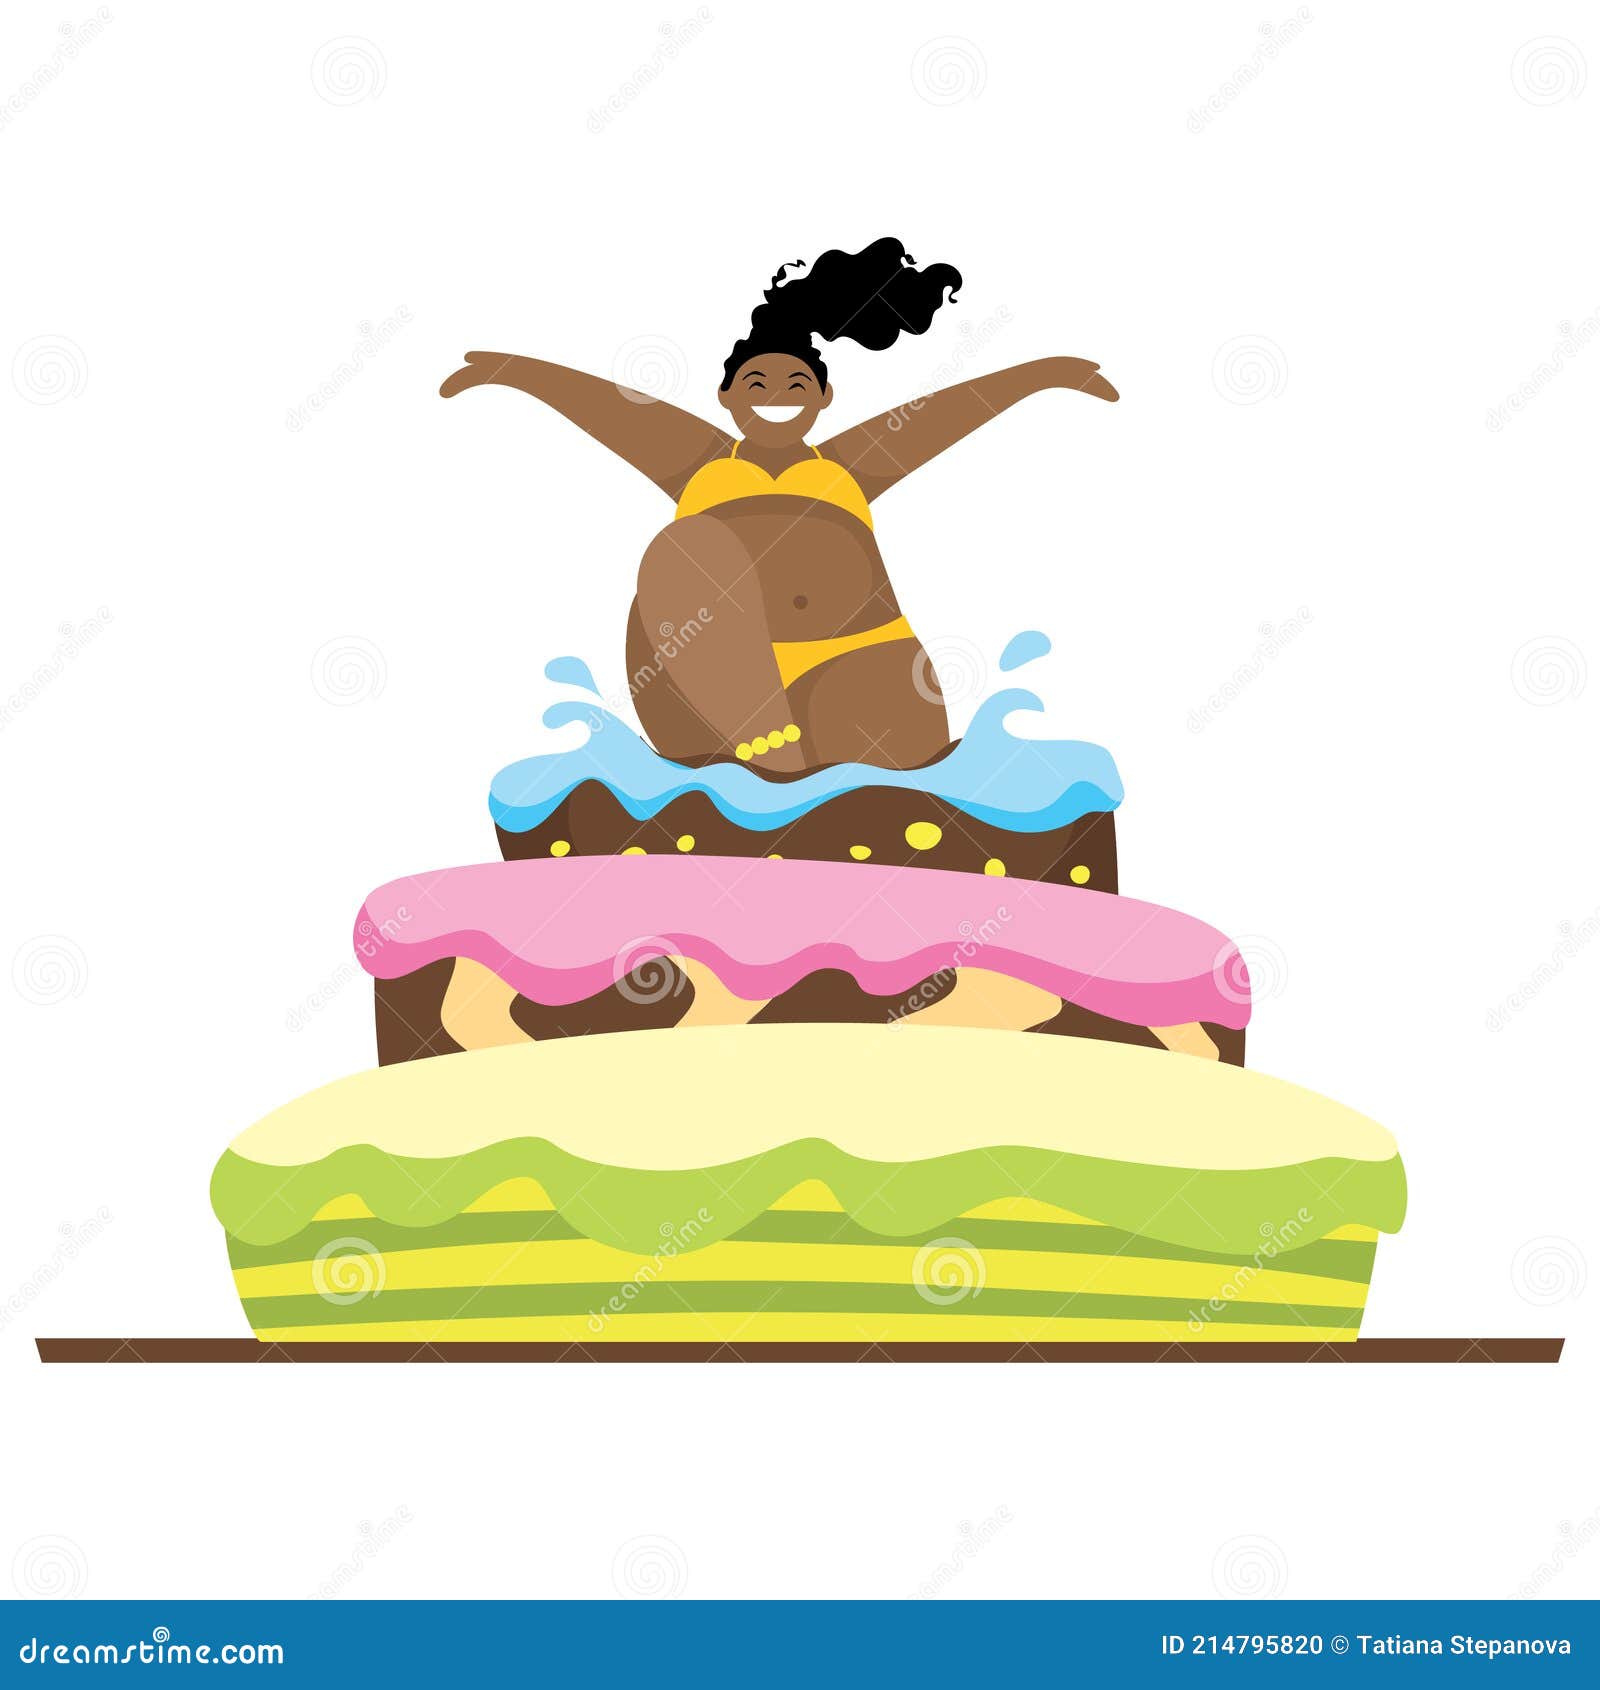 Dark Skinned Girl In Yellow Swimsuit Jumps Out Of A Cake Vector Illustration Cartoon Style